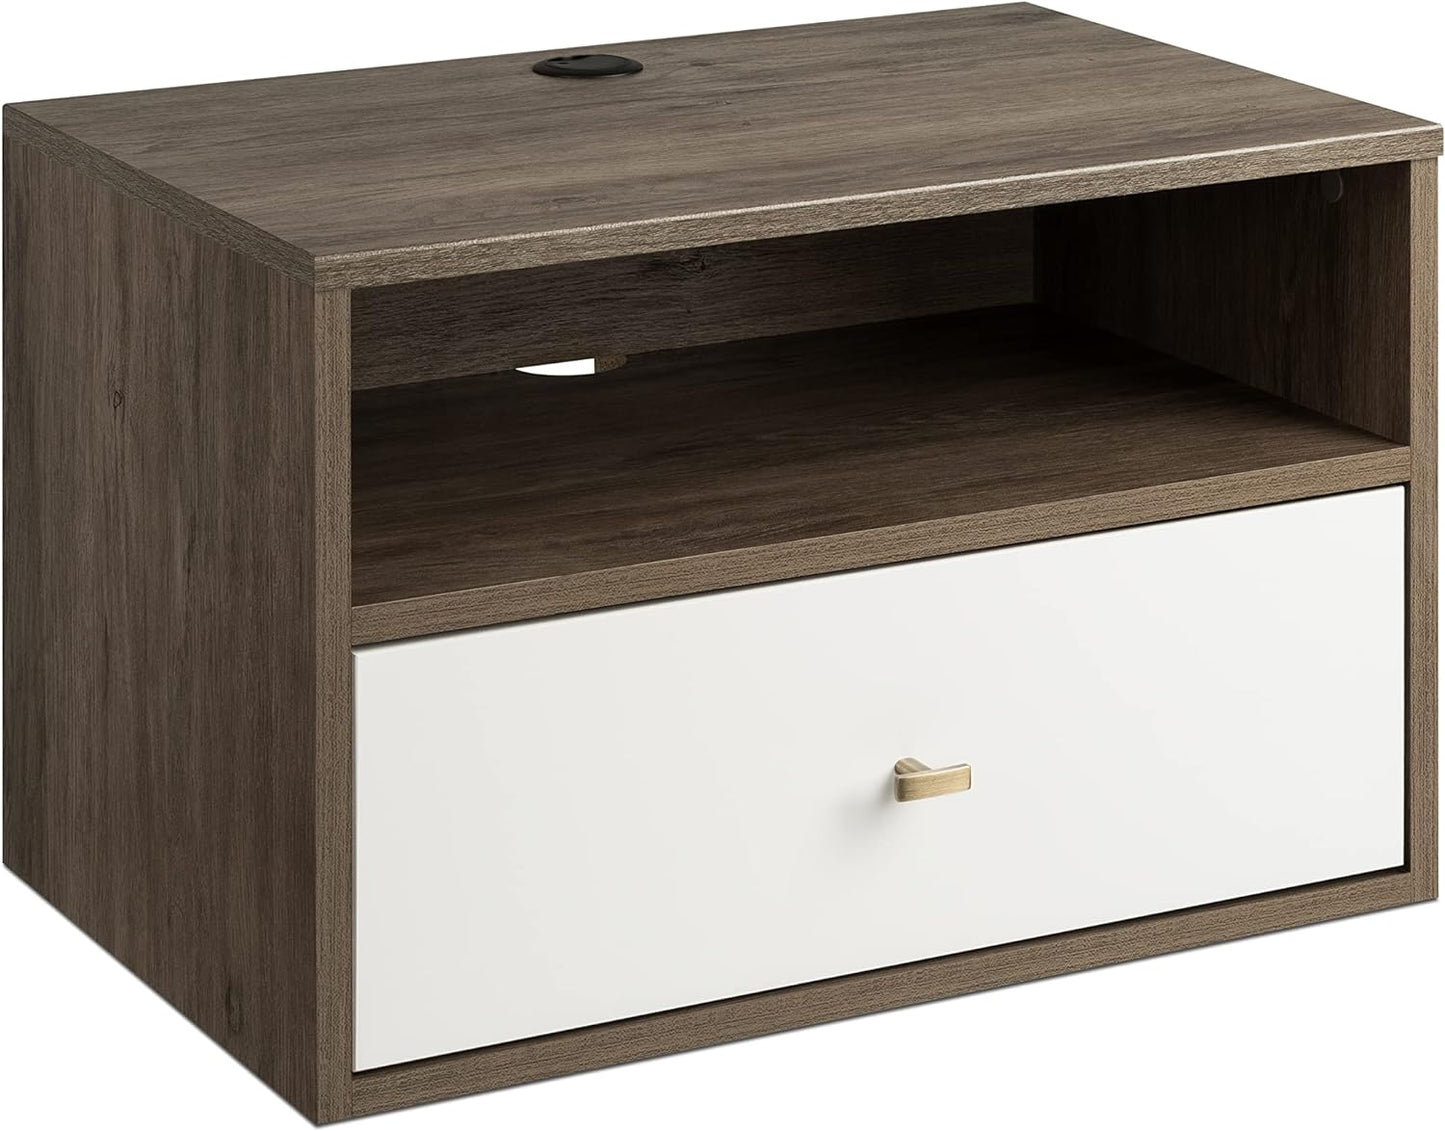 Prepac Floating Composite Wood Nightstand with Open Shelf in Drifted Gray/White